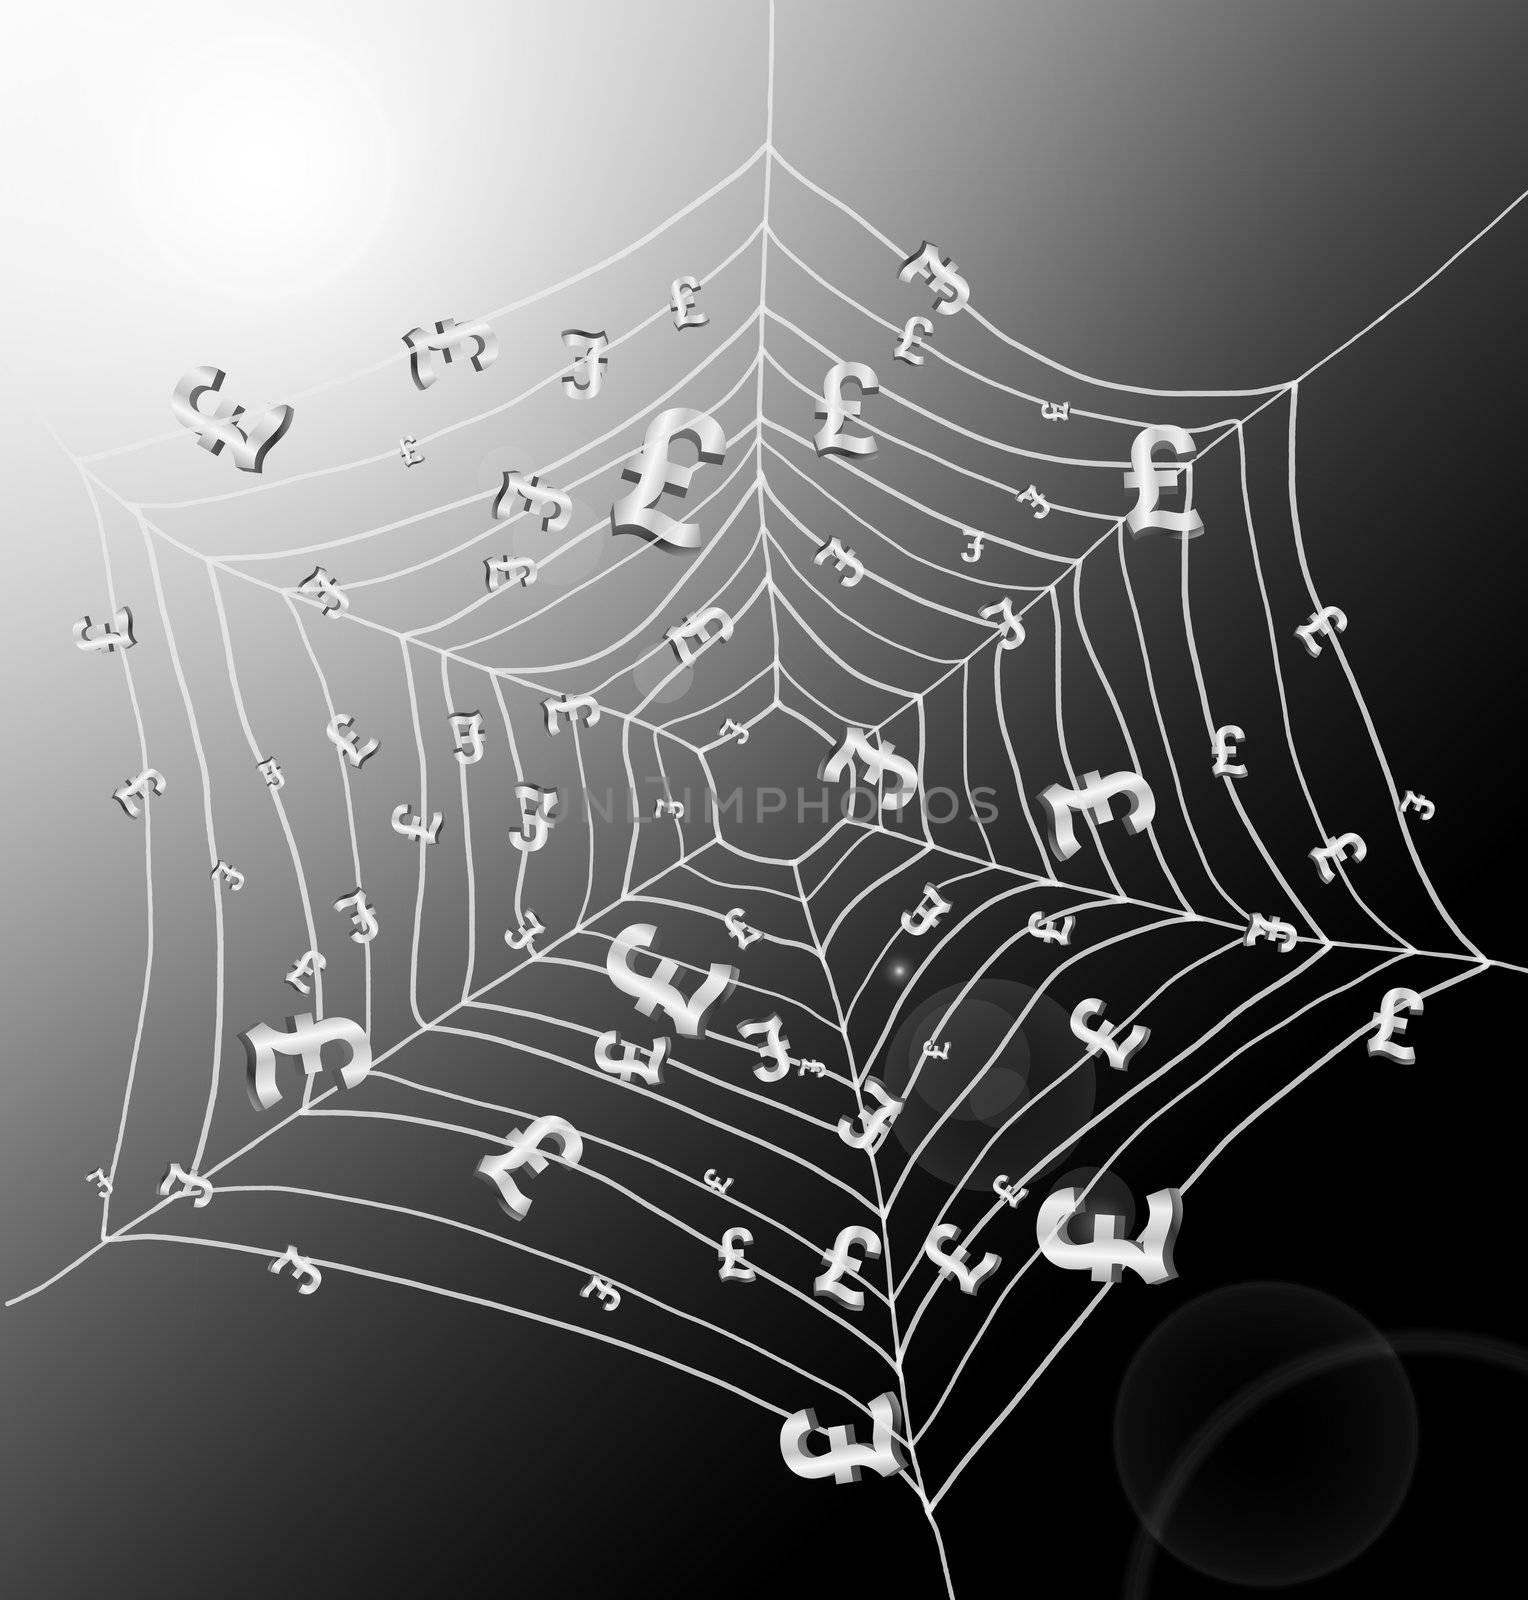 Illustration depicting a spiderweb with Pound signs trapped by the threads. Dark with strong sunlight background.